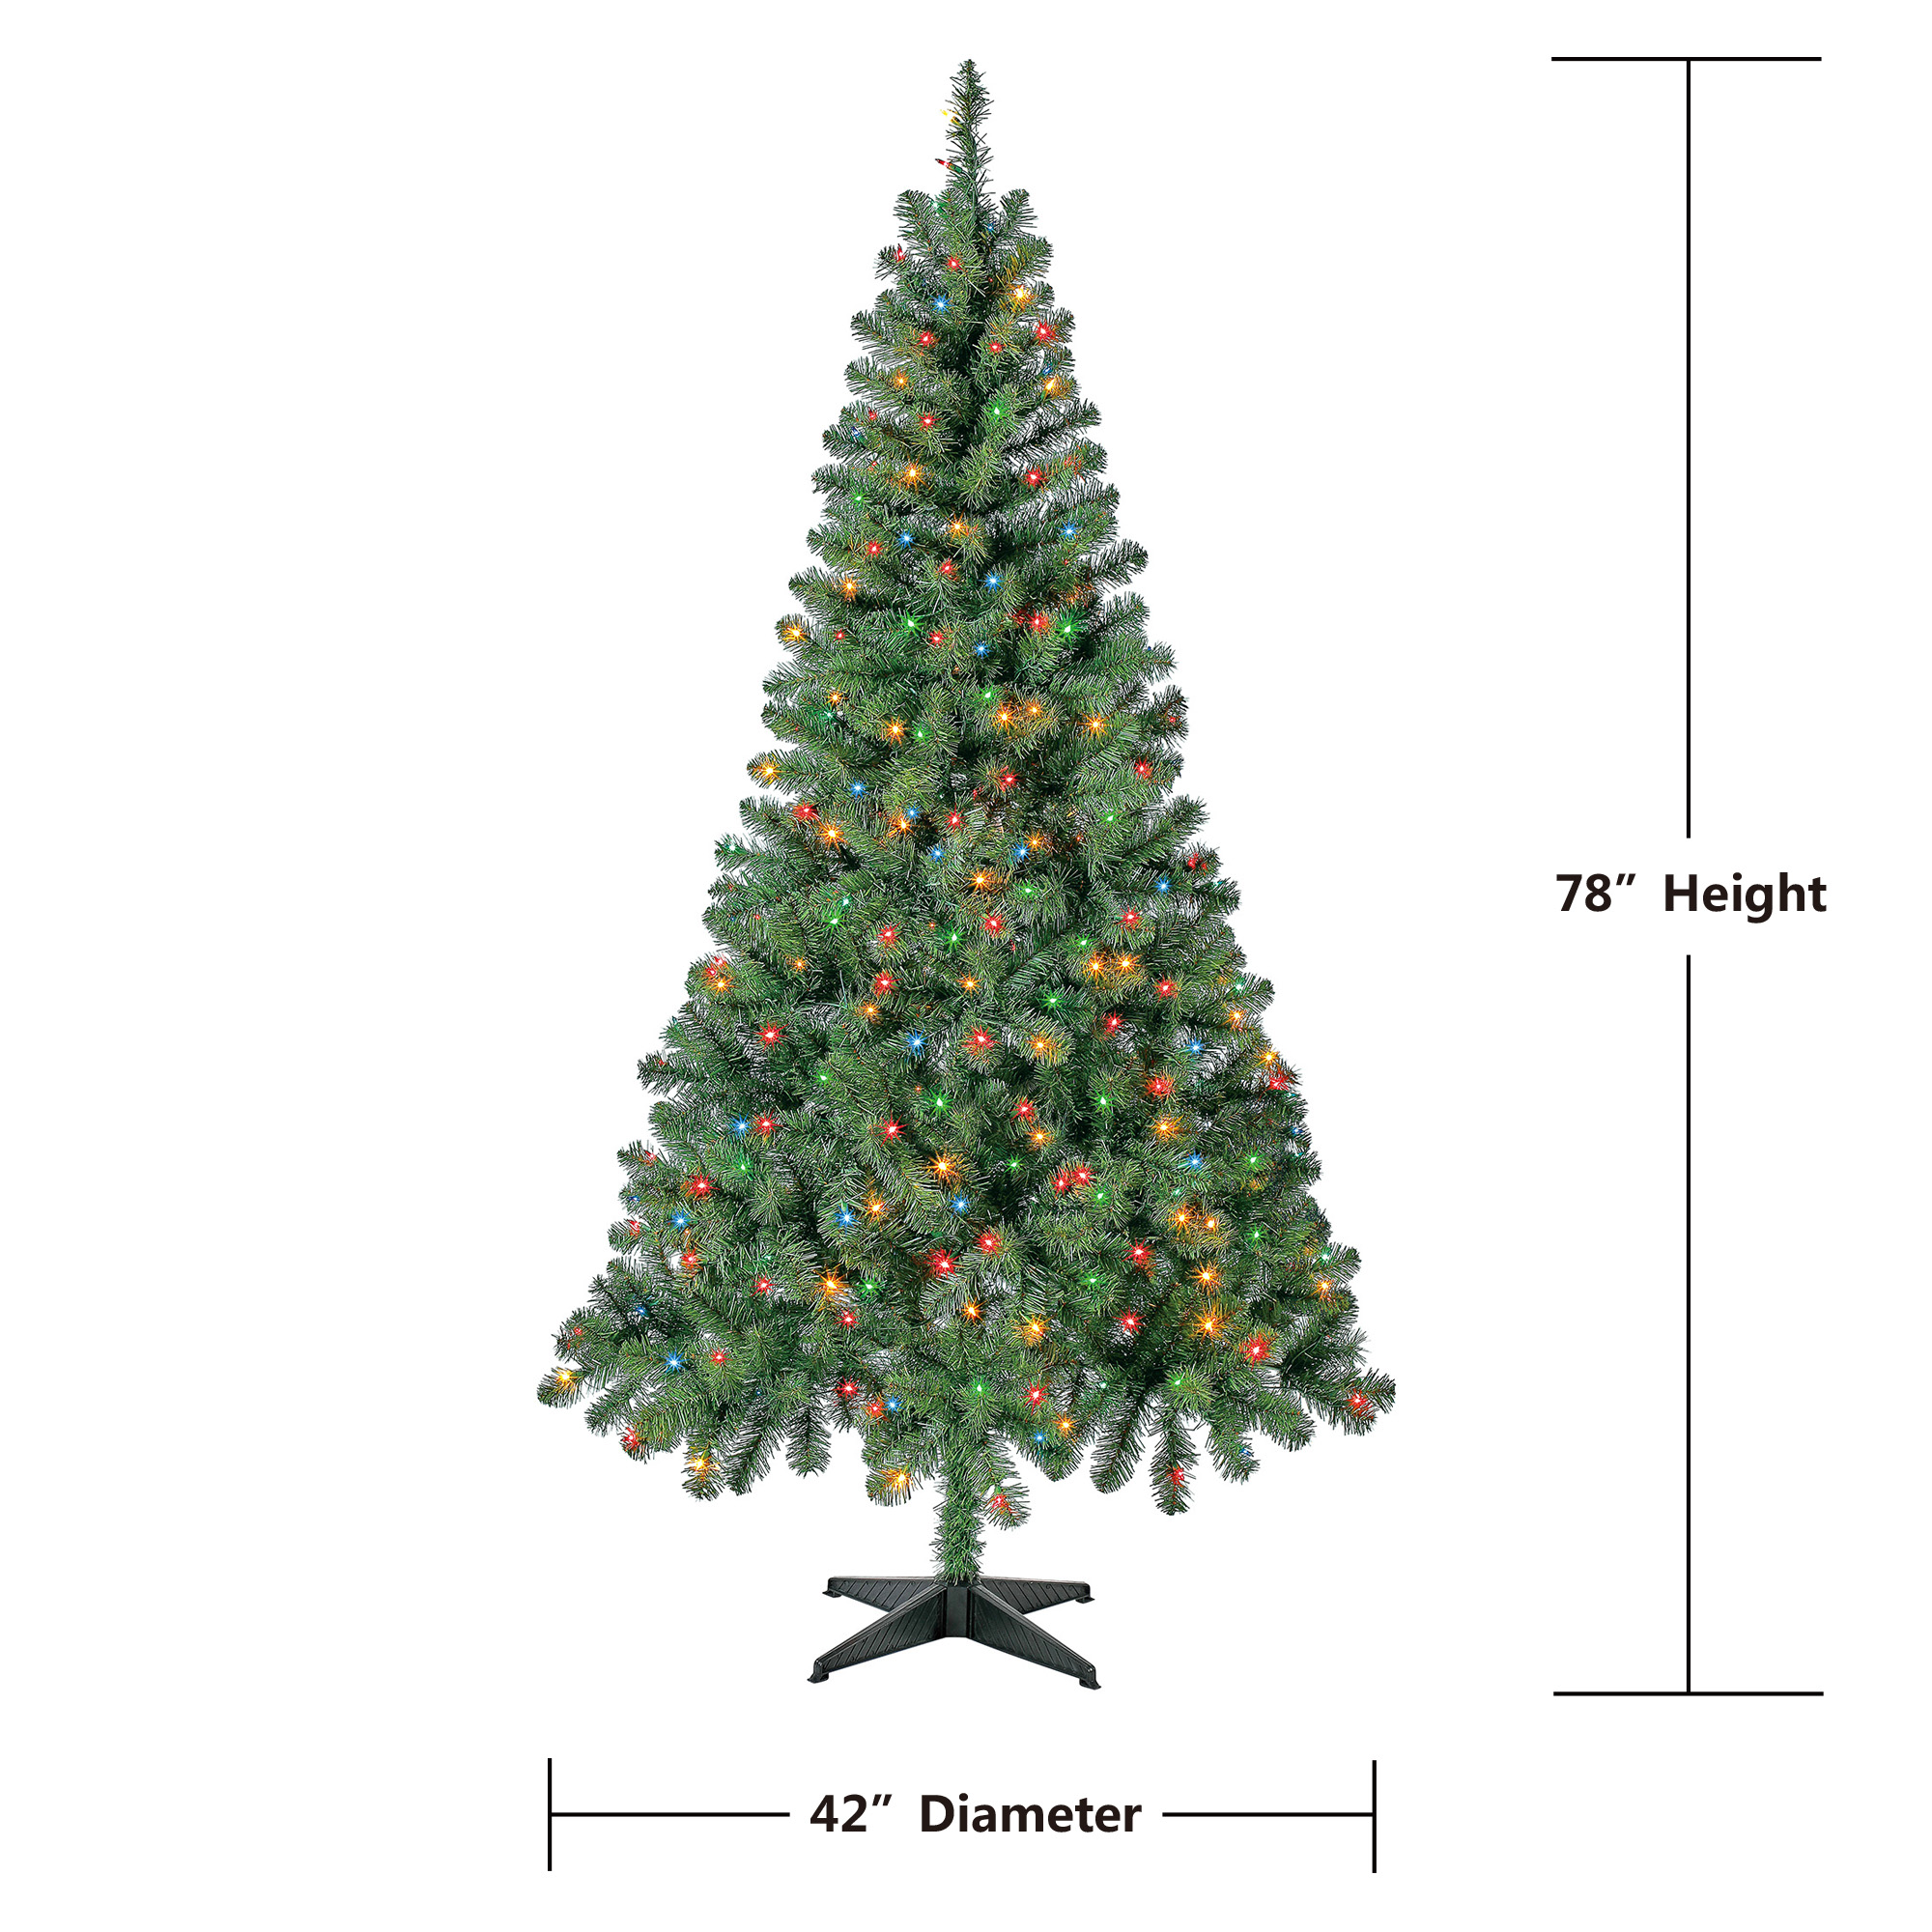 6.5' Holiday Time Pre-Lit Madison Pine Artificial Christmas Tree (w/ Multi-Color Lights) $19.98 + Free S&H w/ Walmart+ or $35+